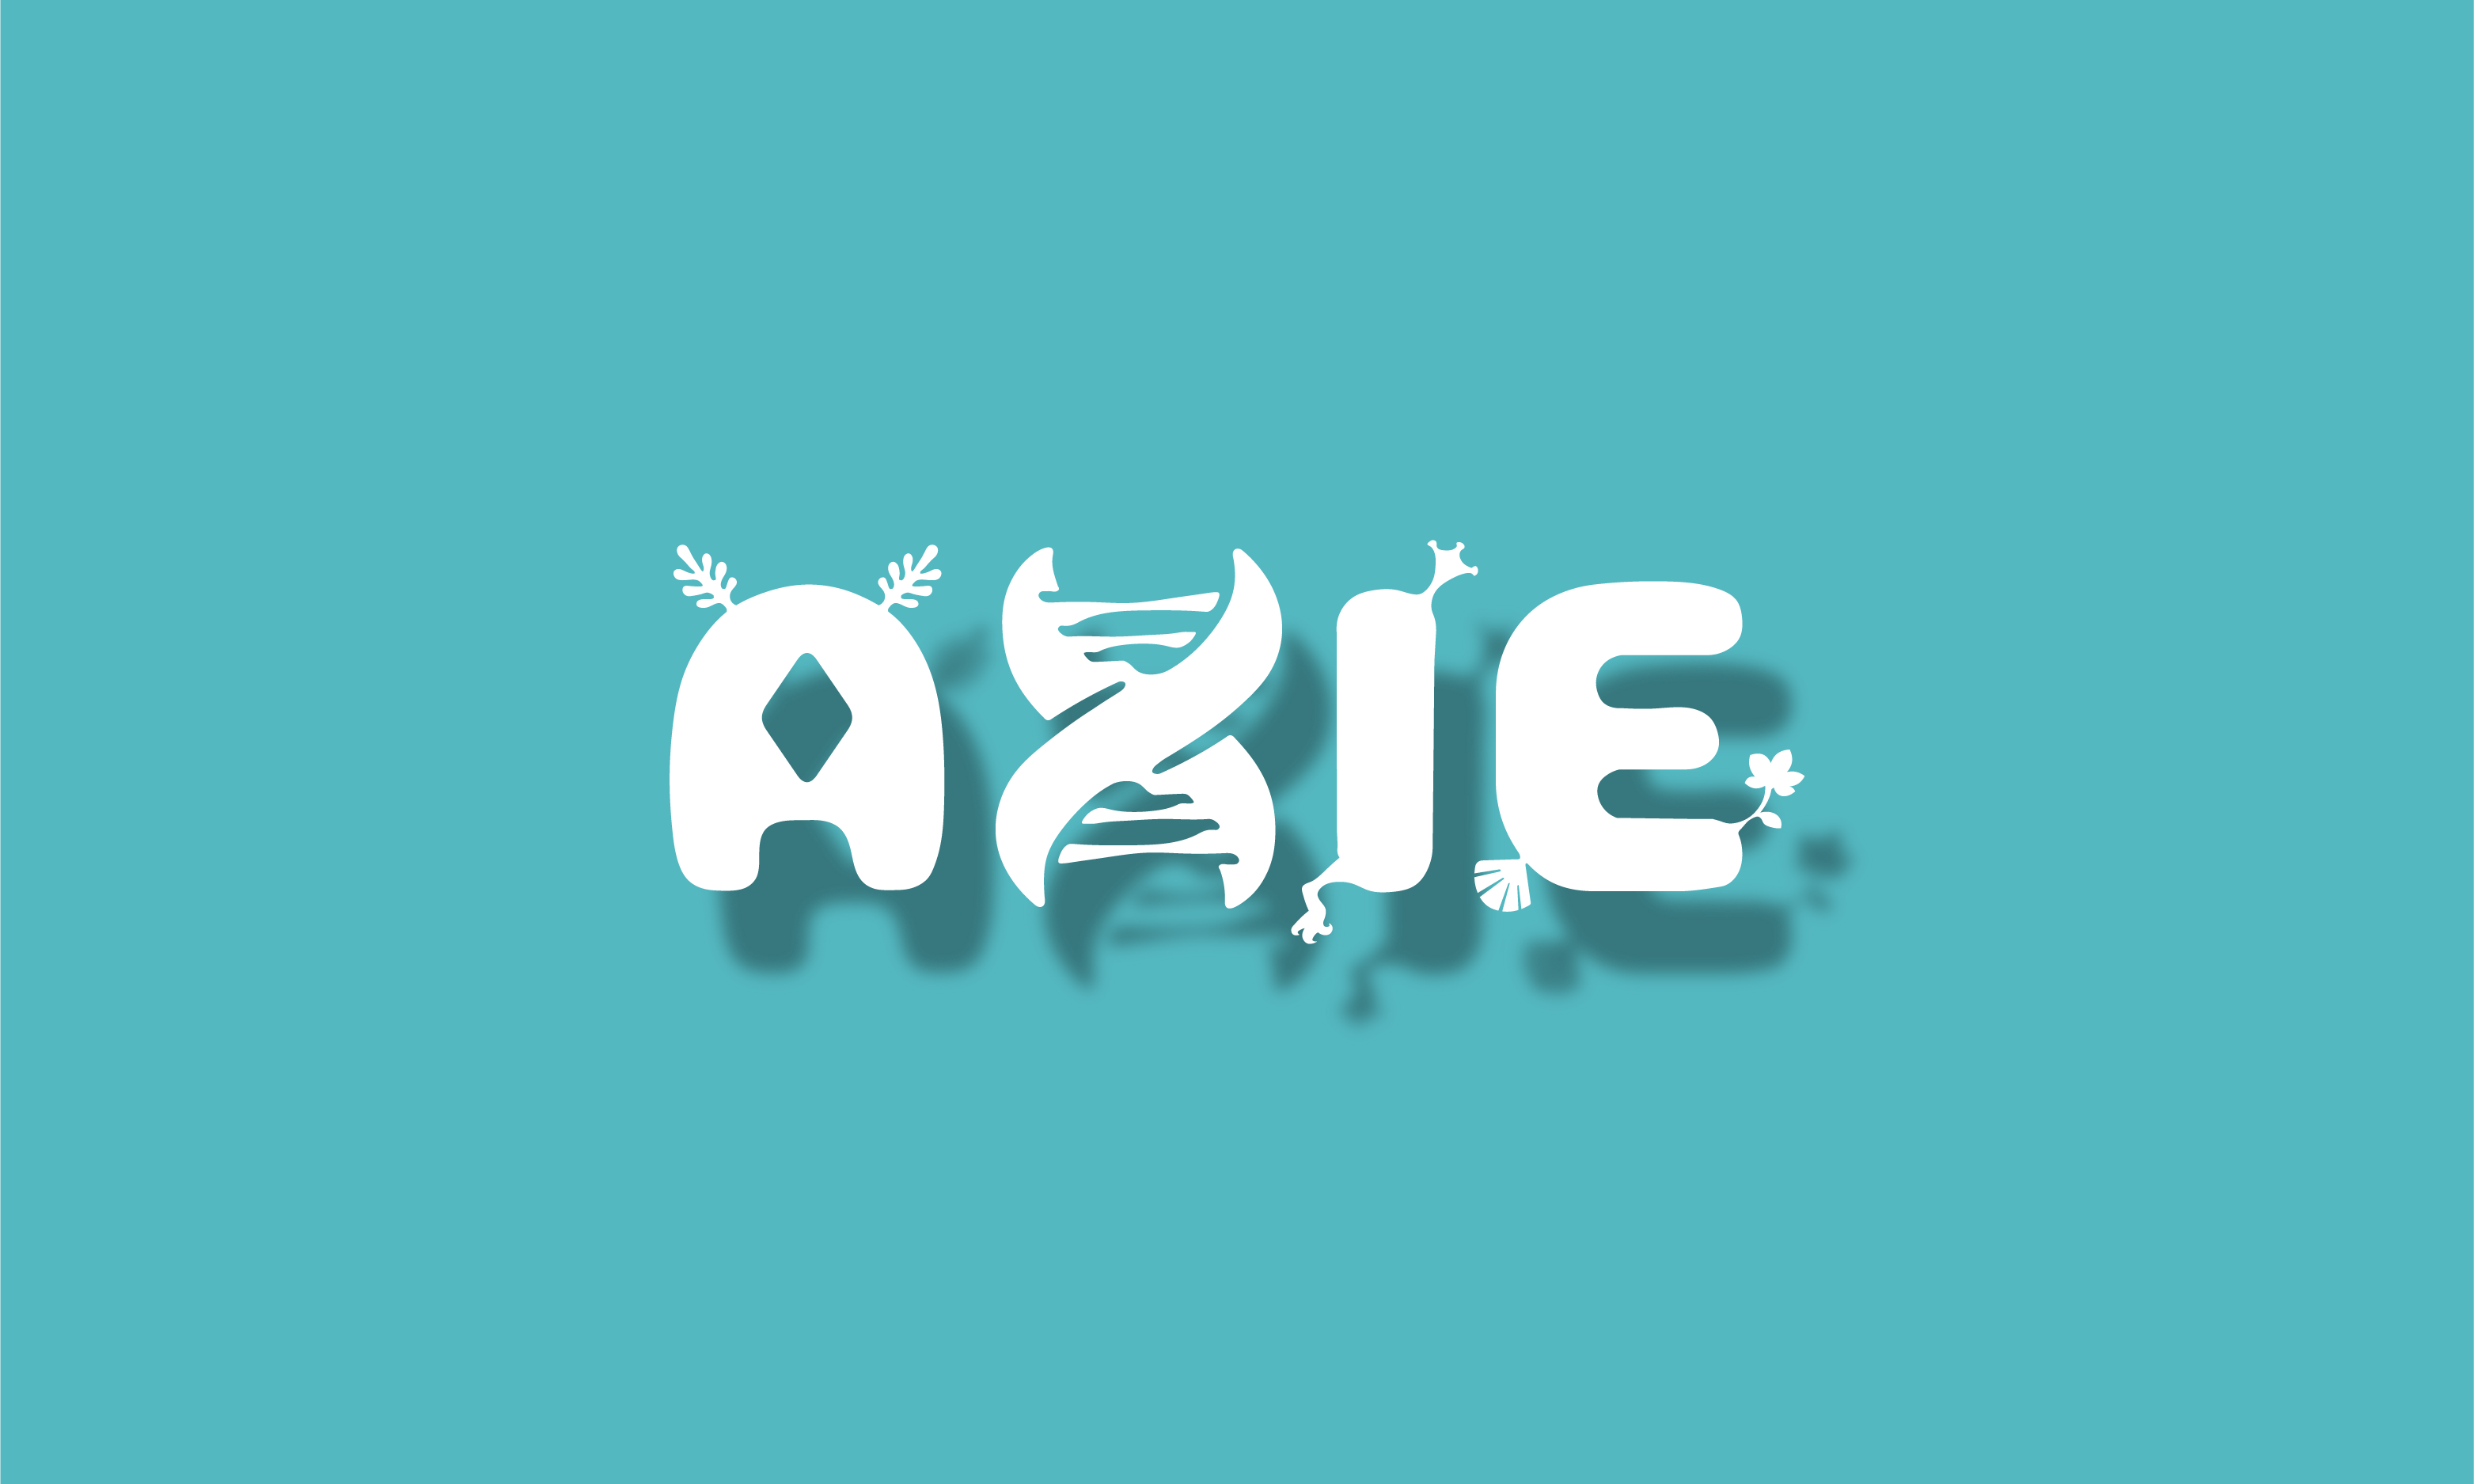 "Explore a world of magical creatures in Axie"